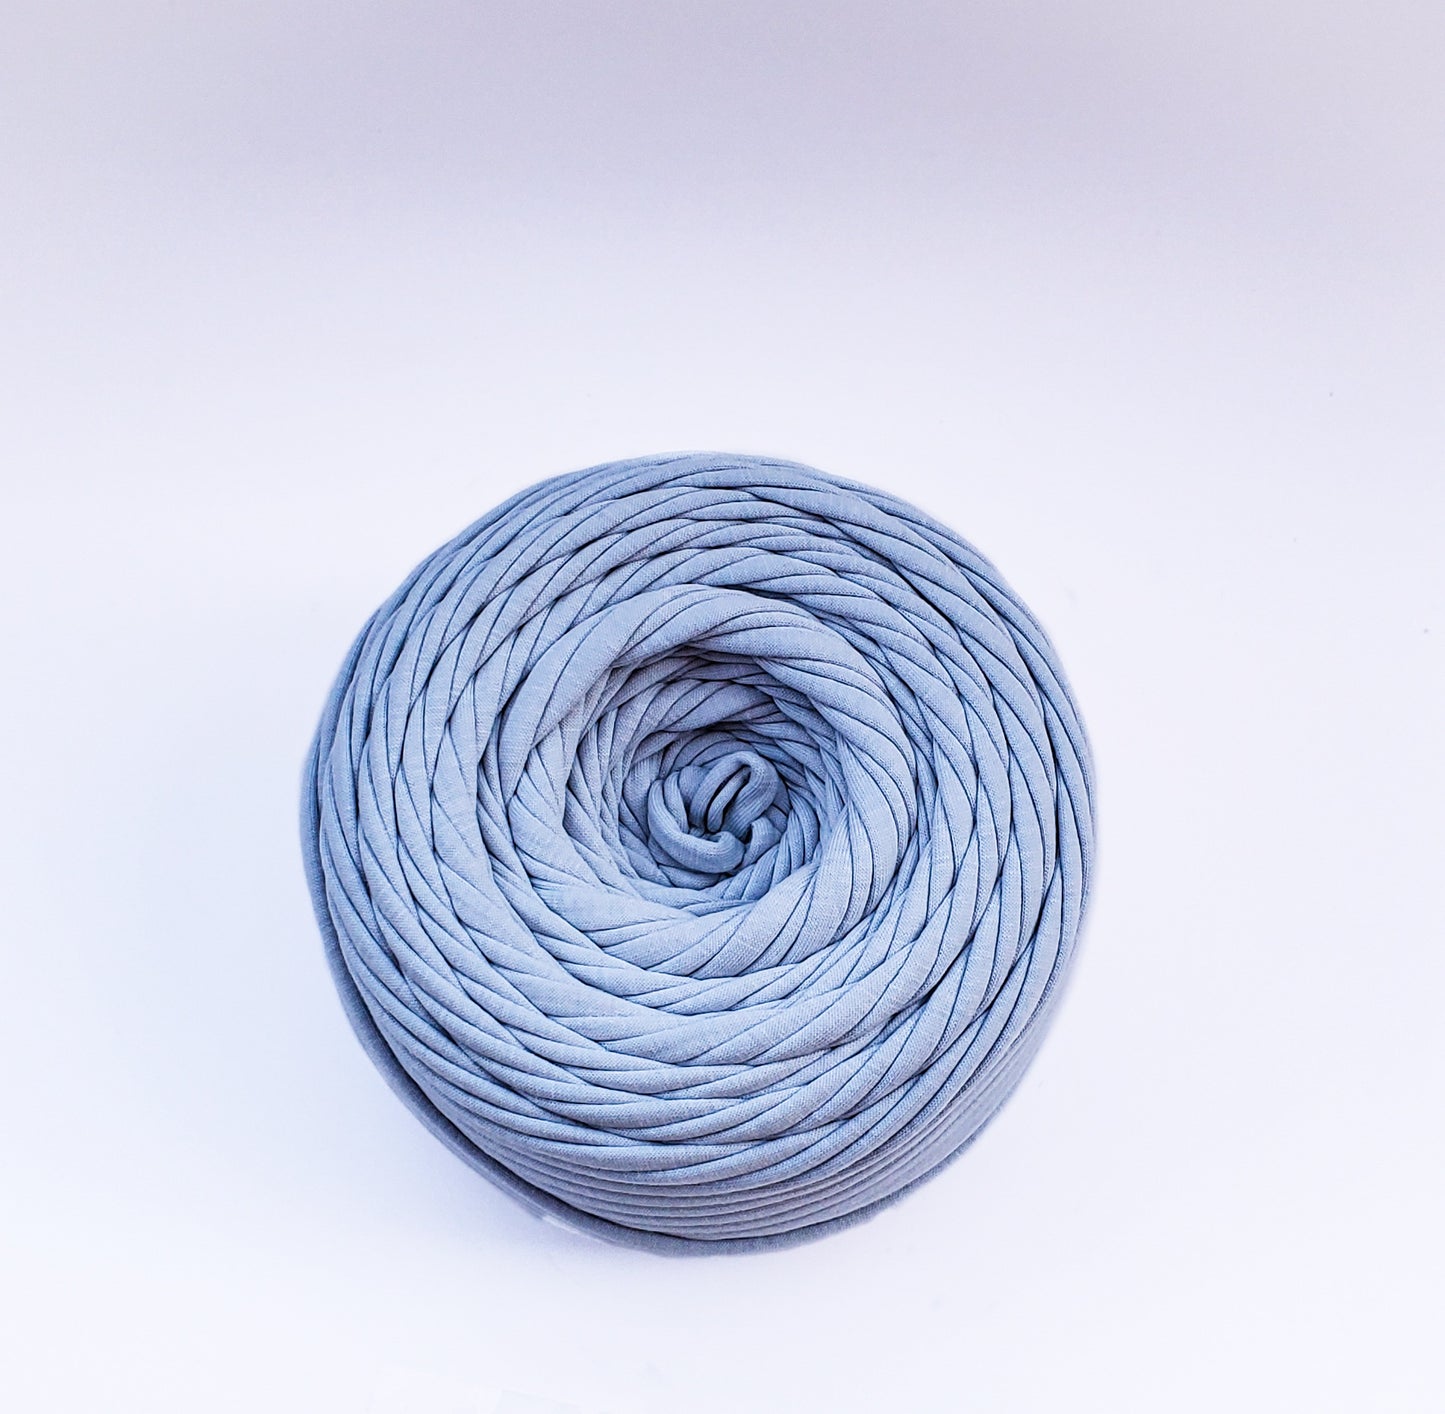 T-shirt yarn for crocheting baskets, bags, rugs and home decor. Bulky Yarn Silver blue